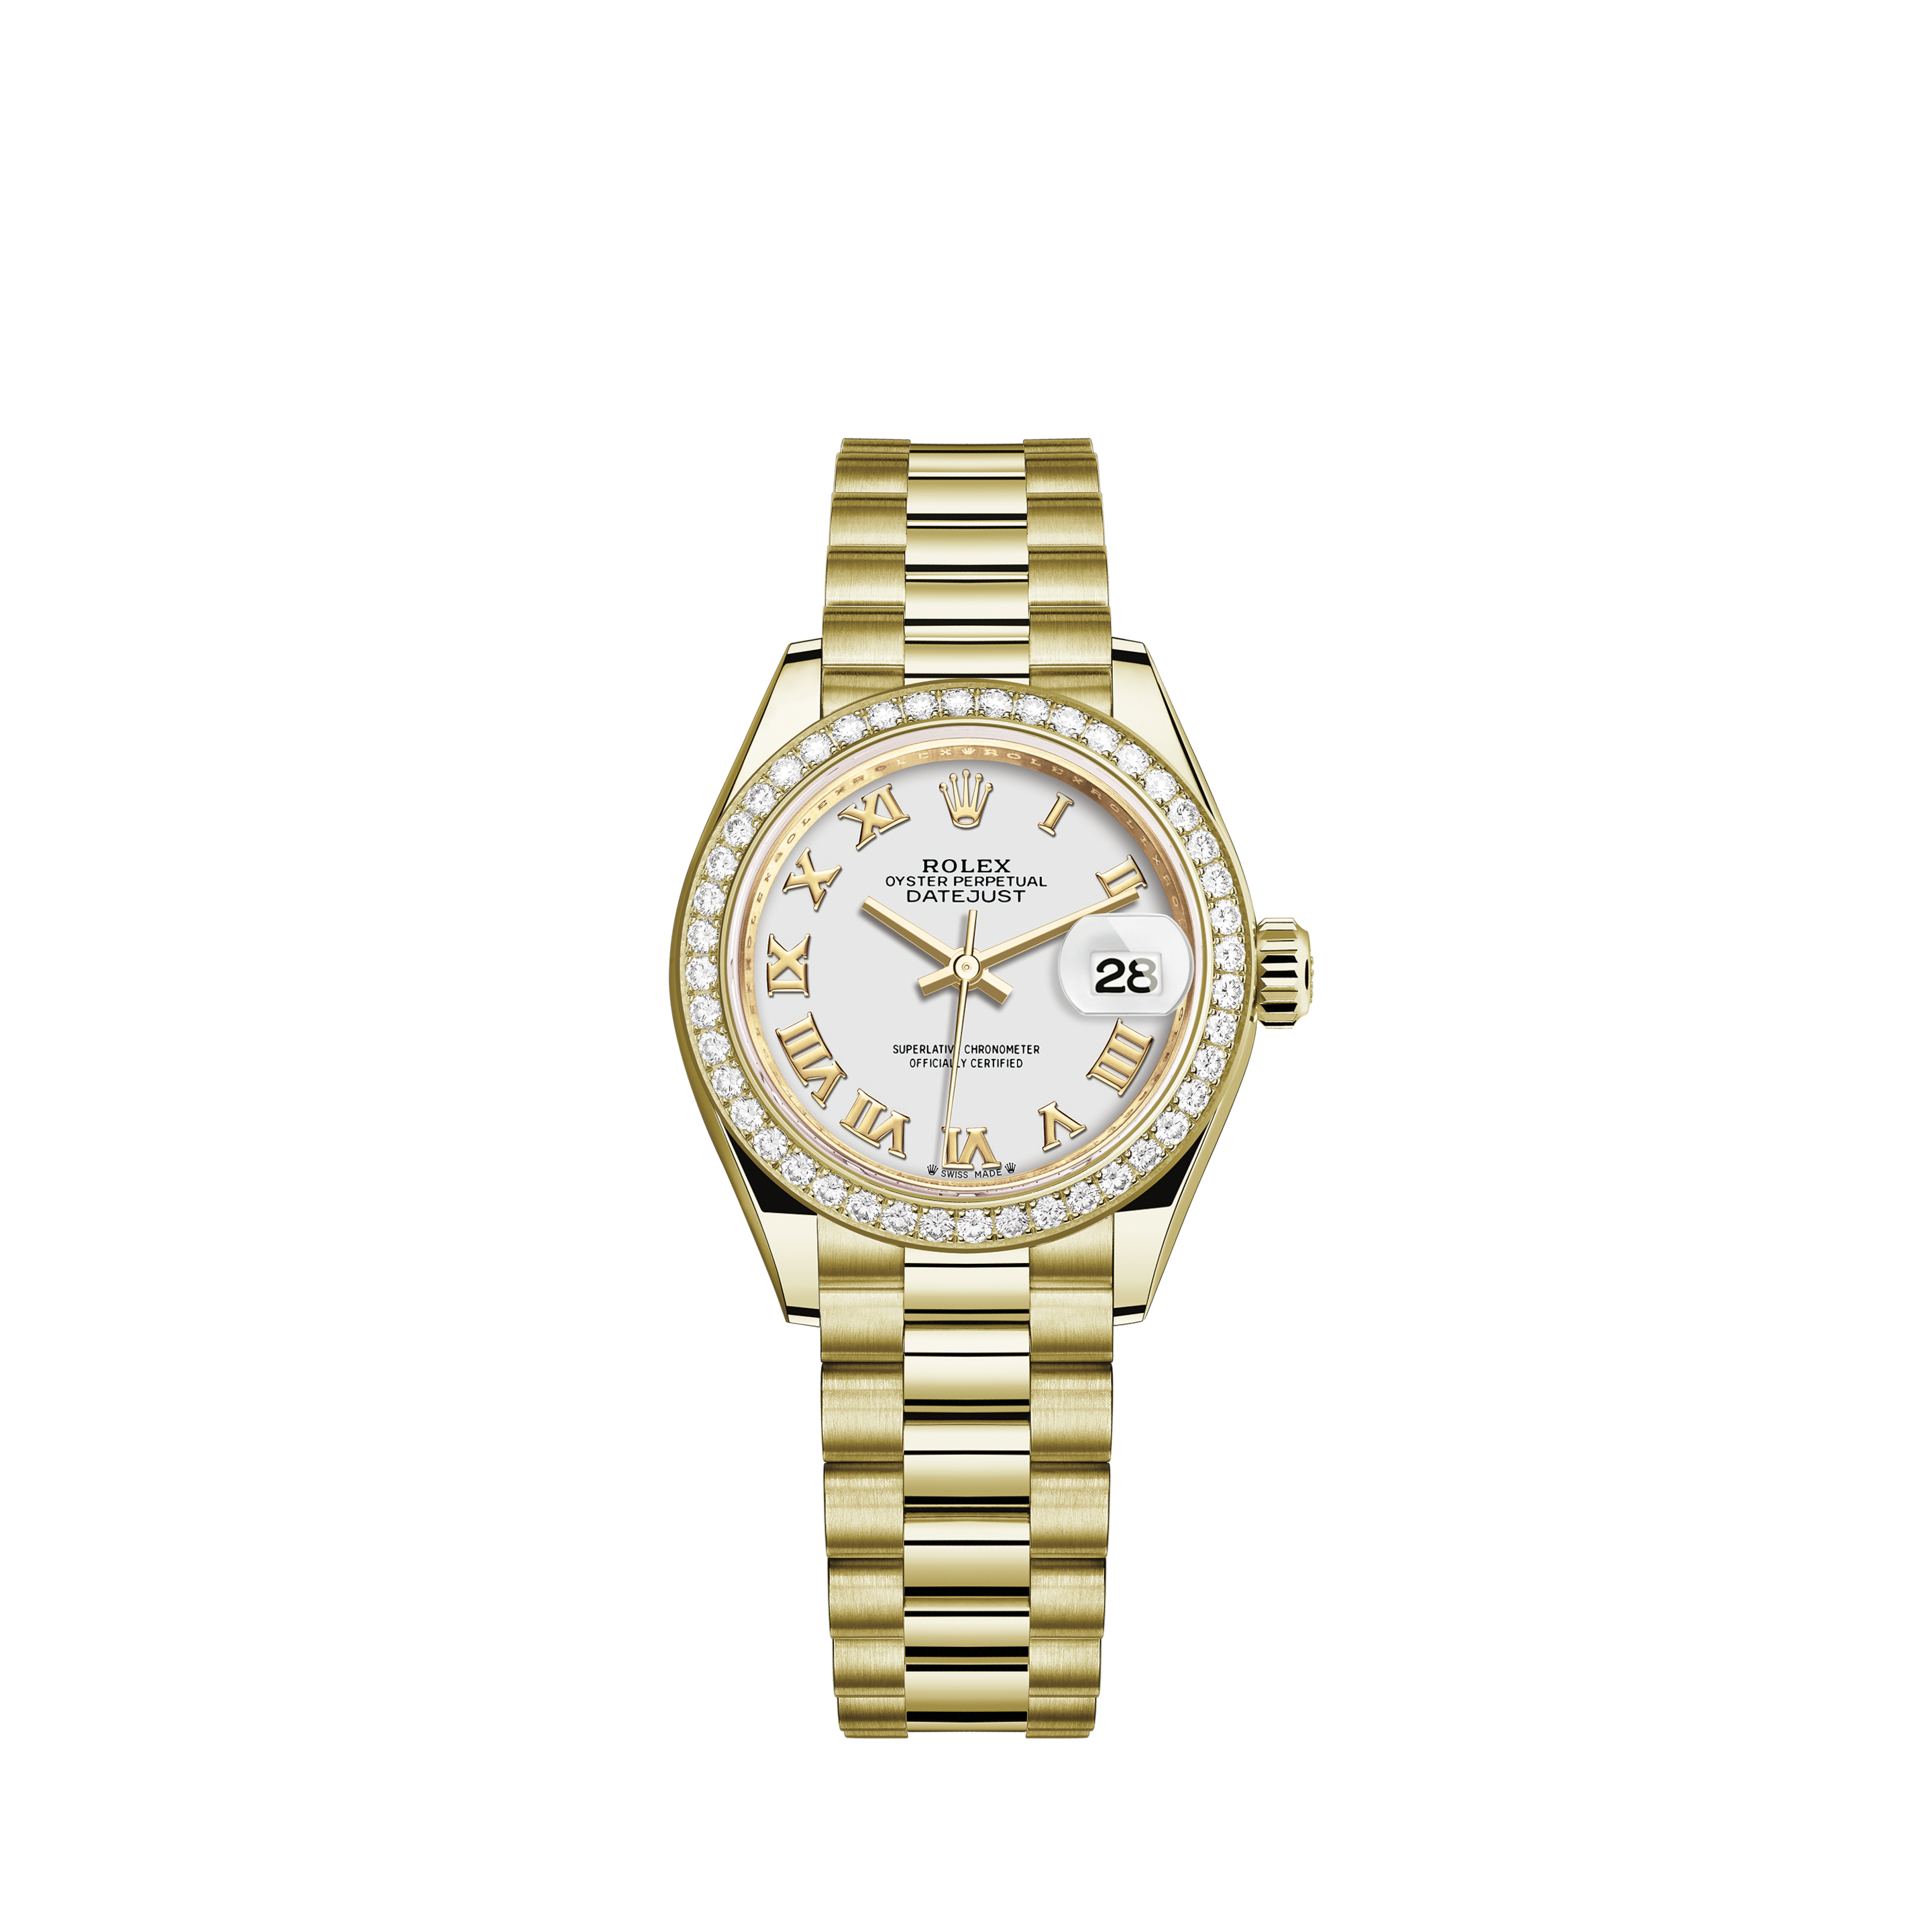 Rolex Presidential 36mm Diamond White Color Dial with Baguette Diamond Accent Diamond 18KT Yellow Gold Watch